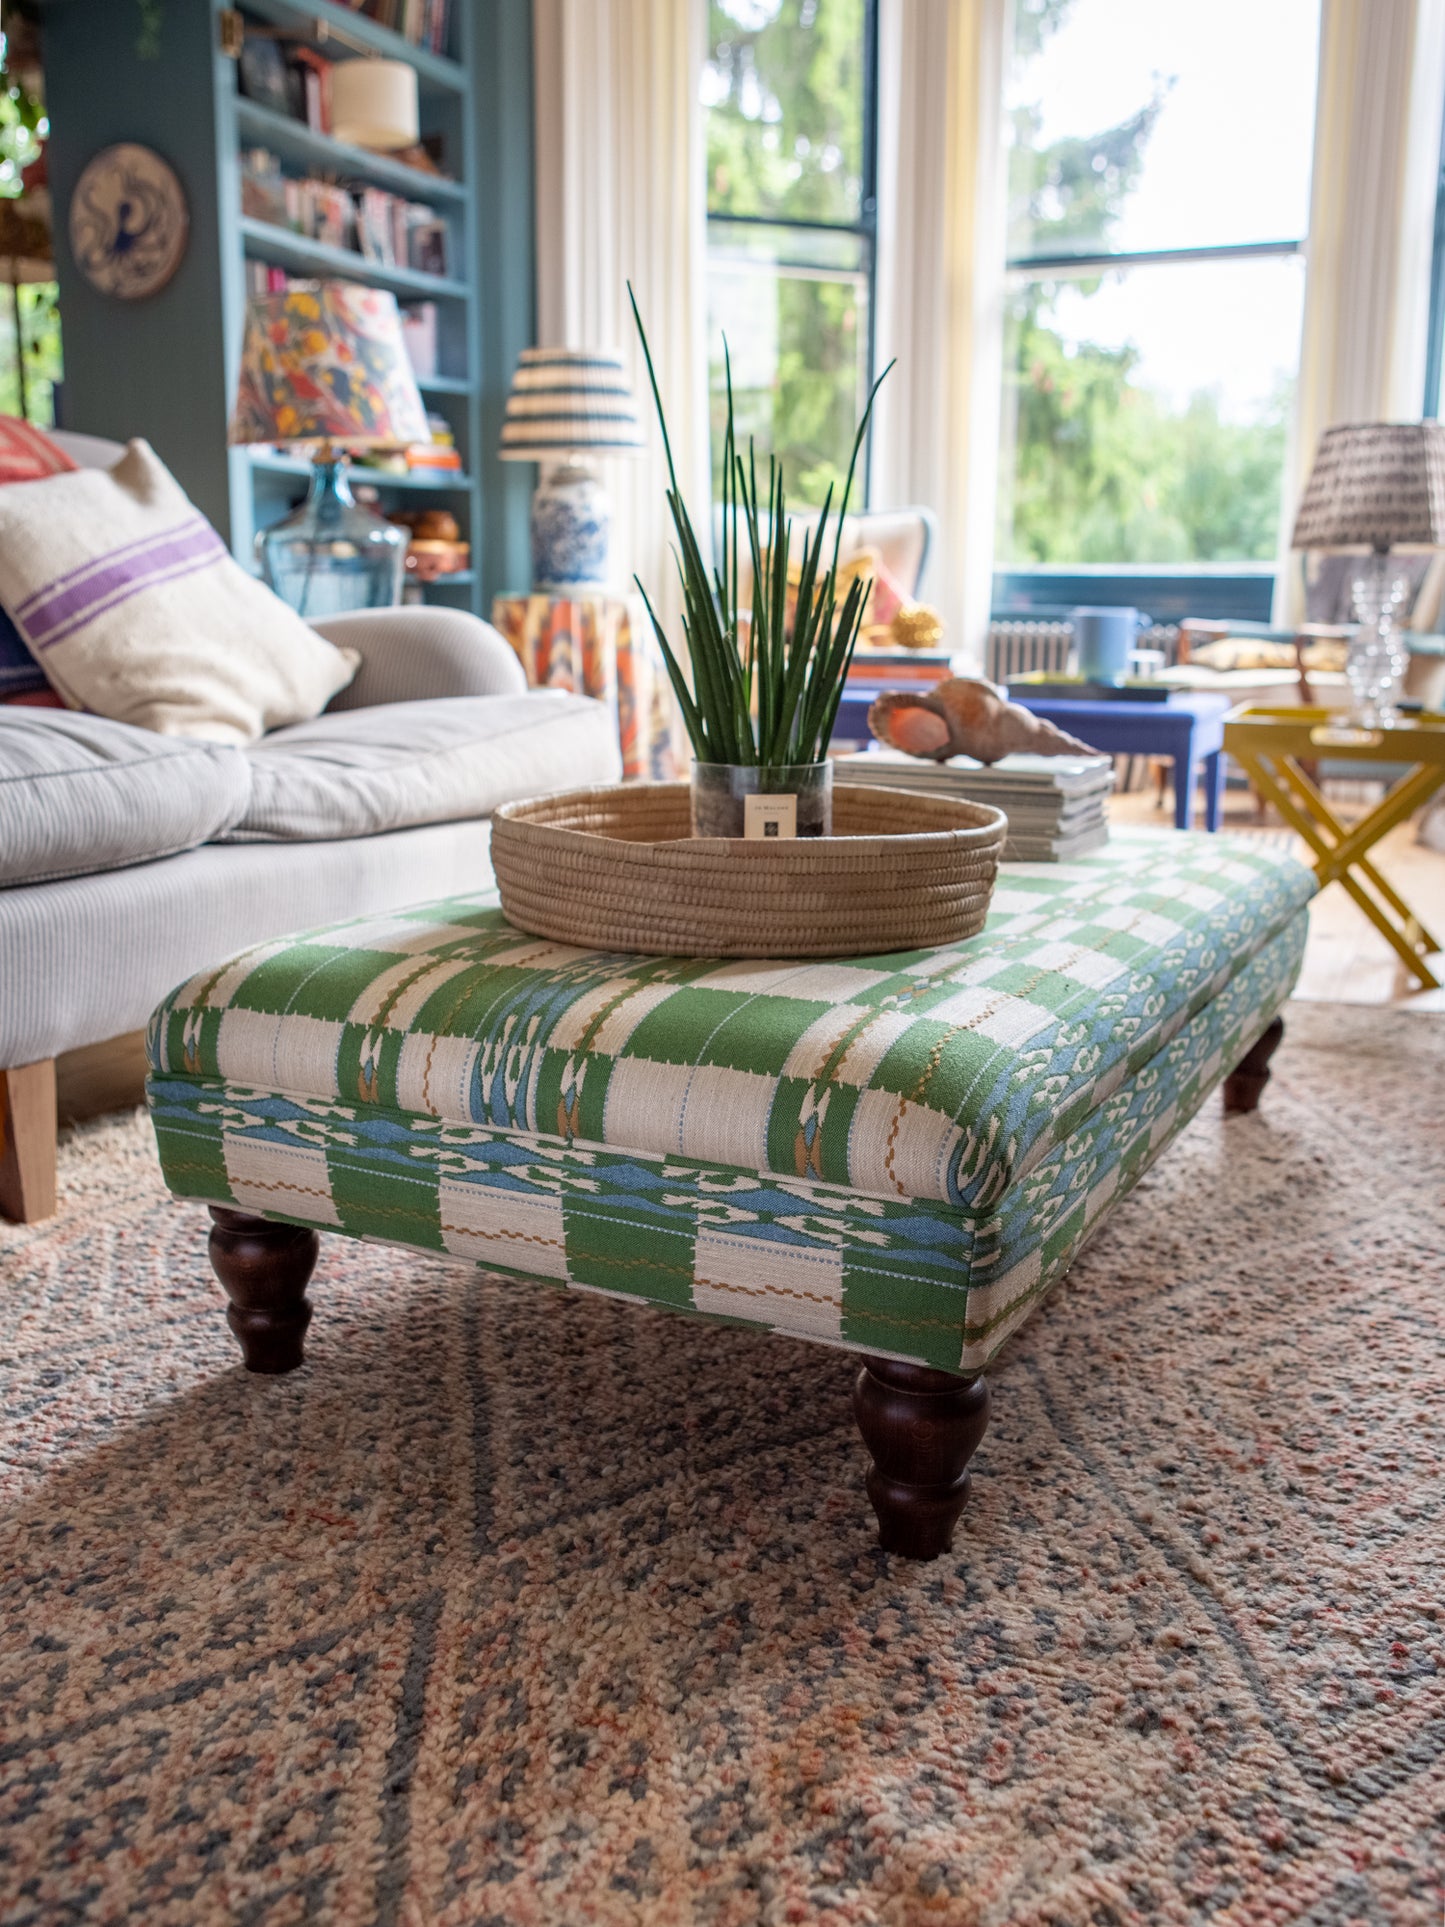 Bespoke Bryher Ottoman Footstool In Any Fabric